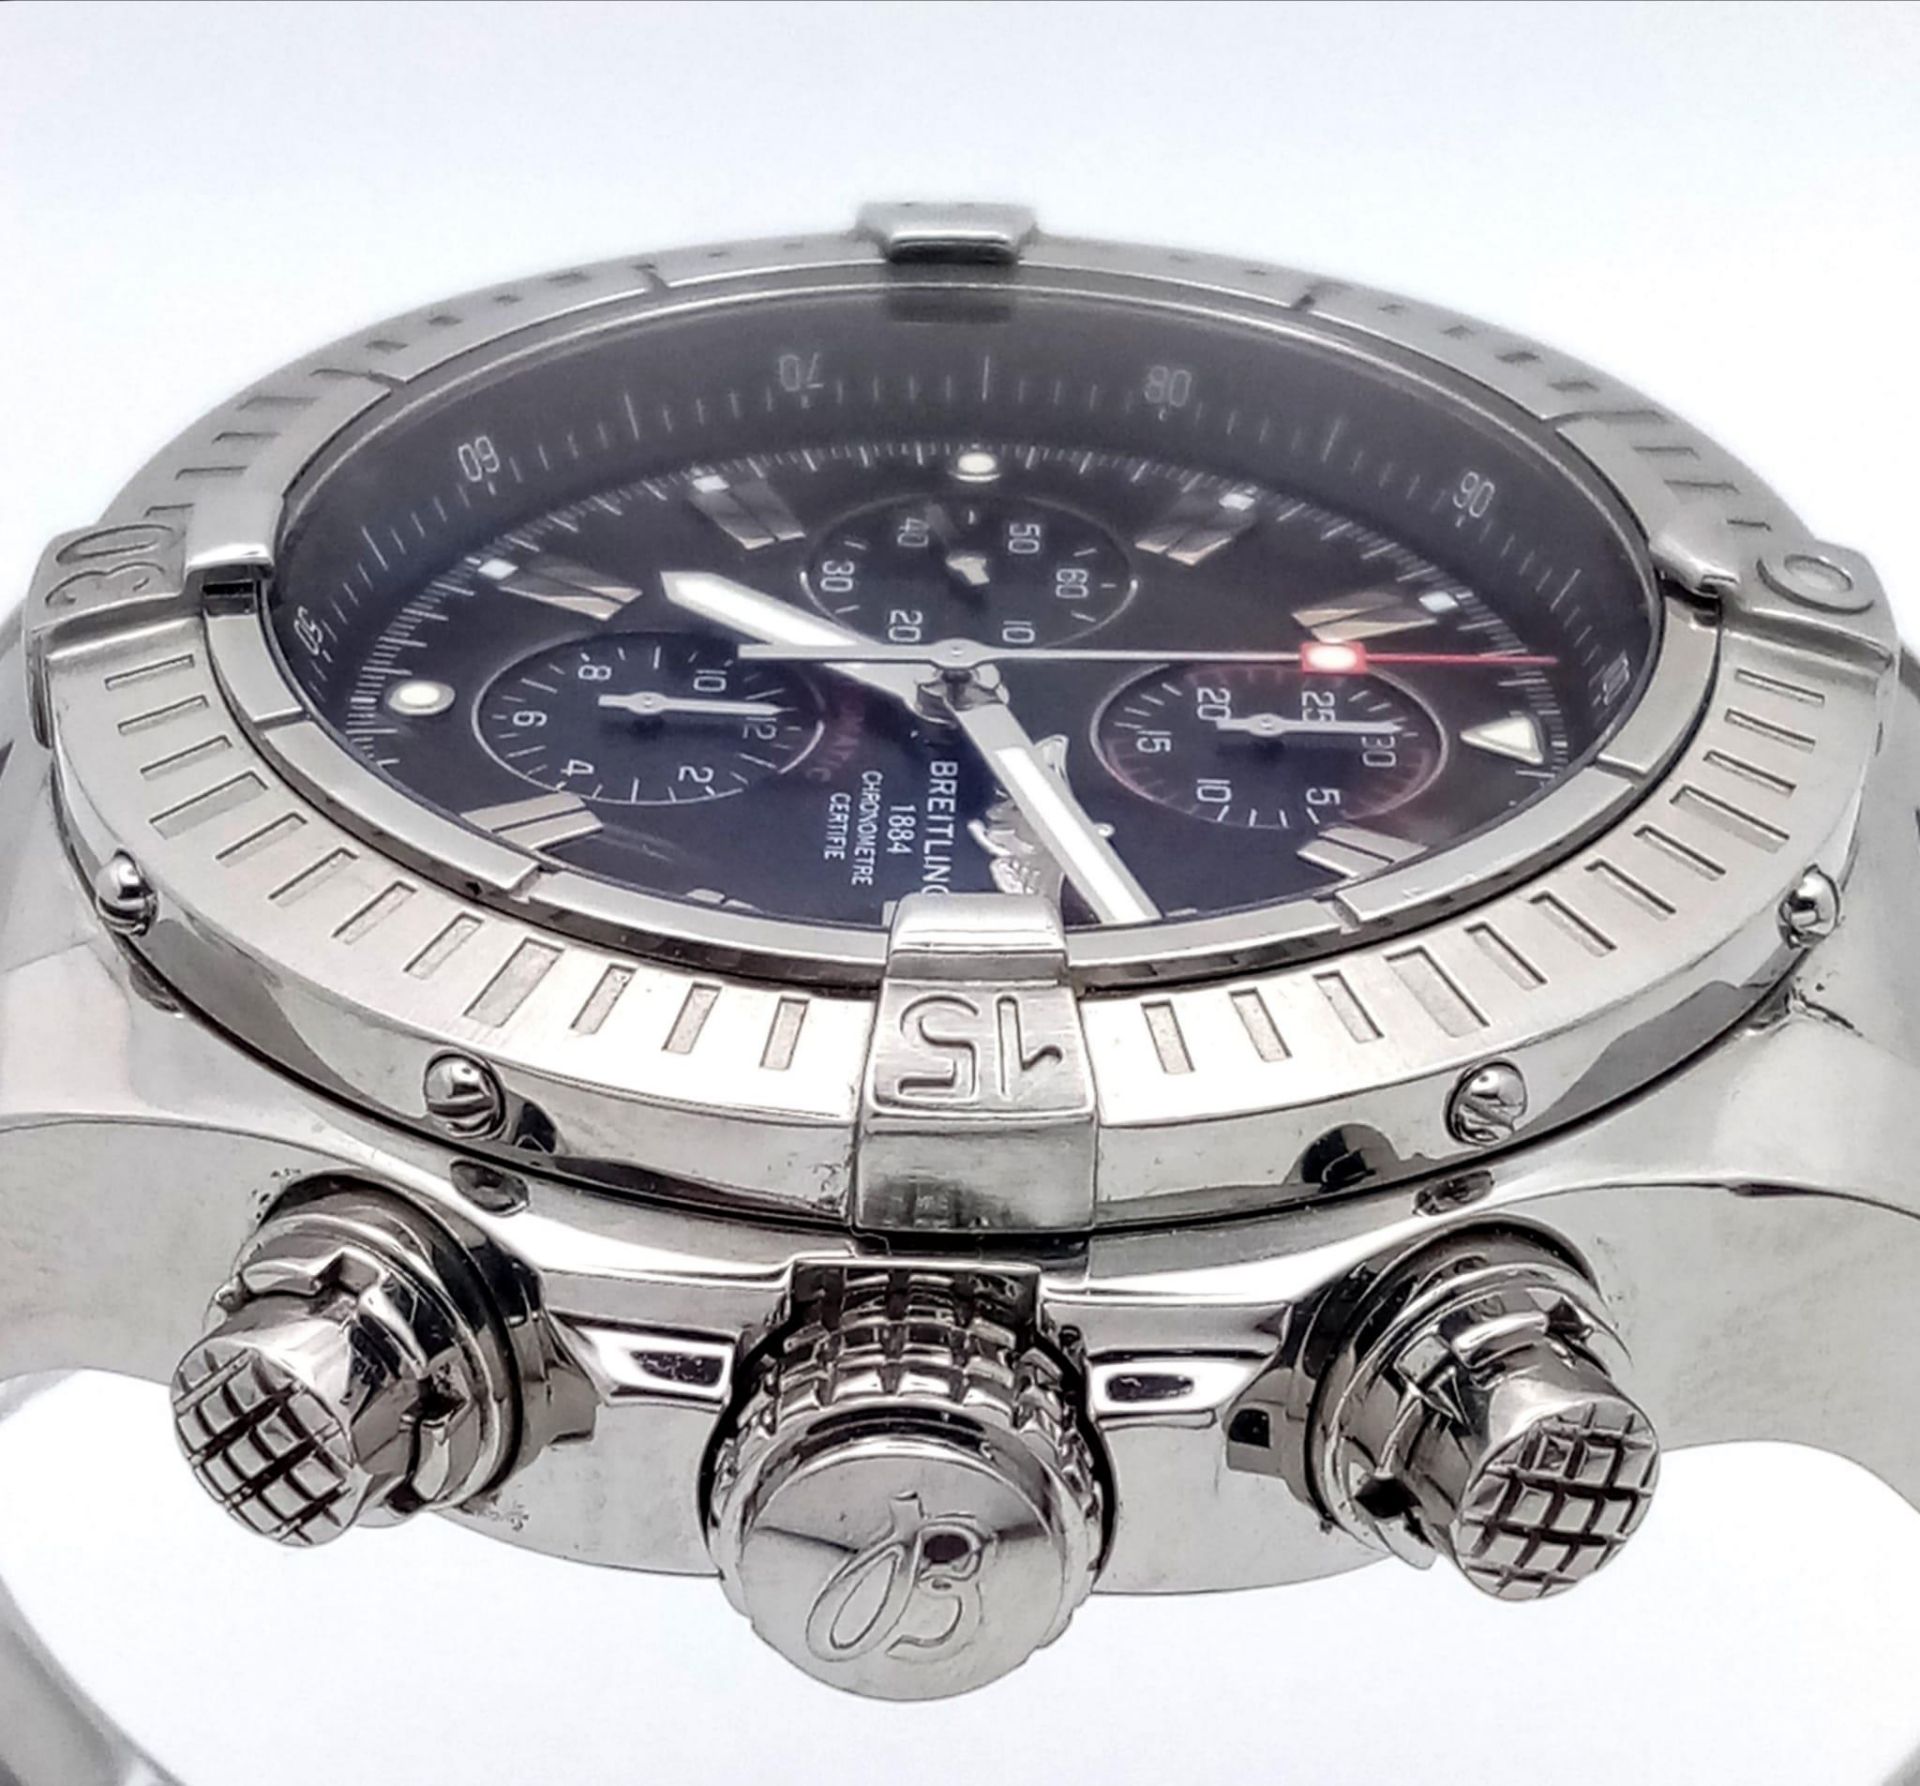 A"BREITLING"CHRONOMETRE IN STAINLESS STEEL WITH 3 SUBDIALS AND COMES IN ITS ORIGINAL BOX . VERY GOOD - Bild 5 aus 9